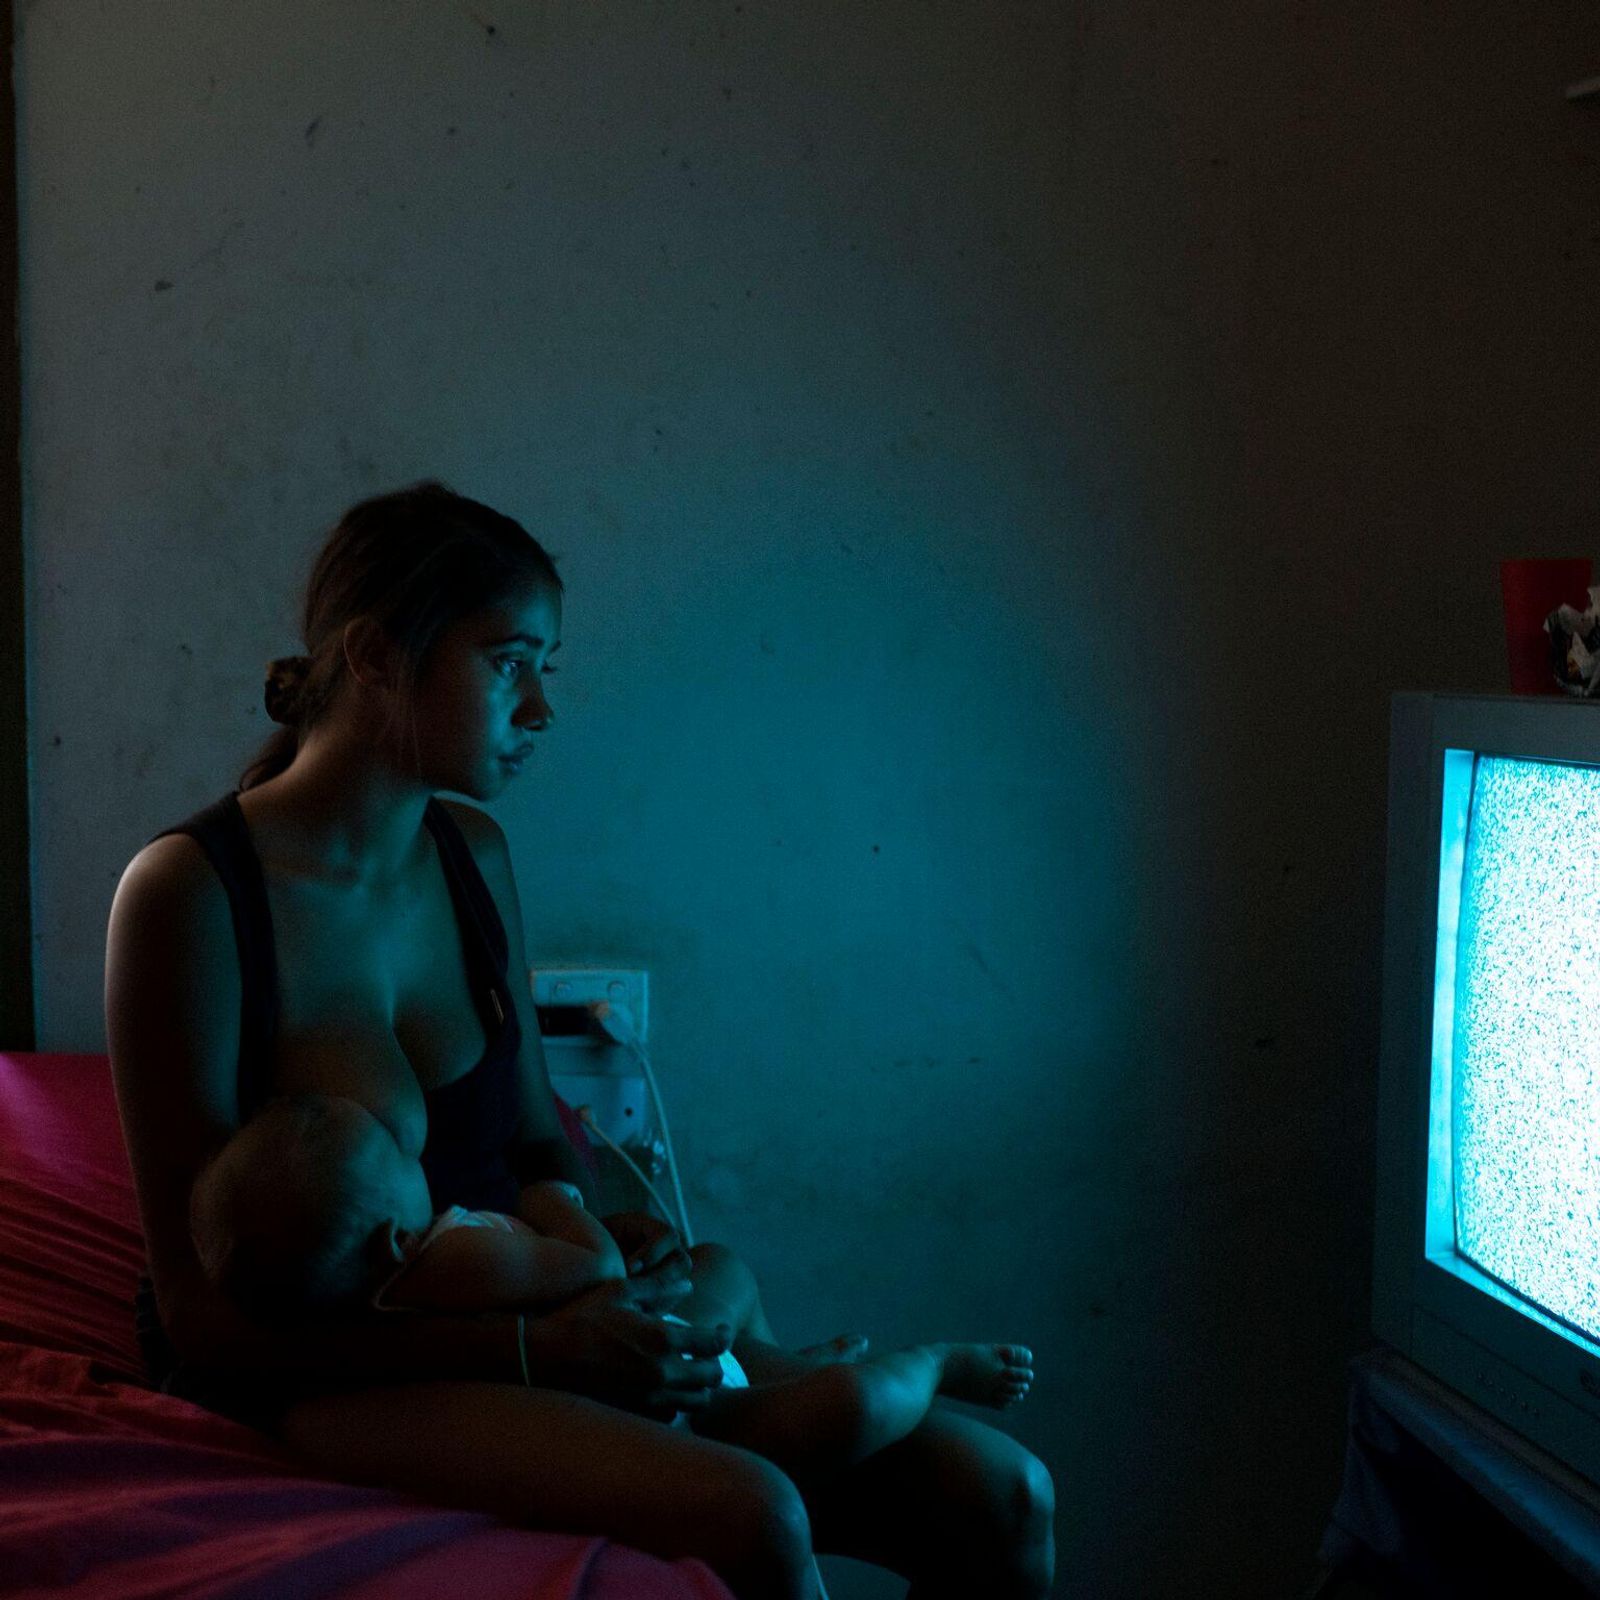 © Raphaela Rosella, from the series You'll Know It When You Feel It (Main Prize winner)